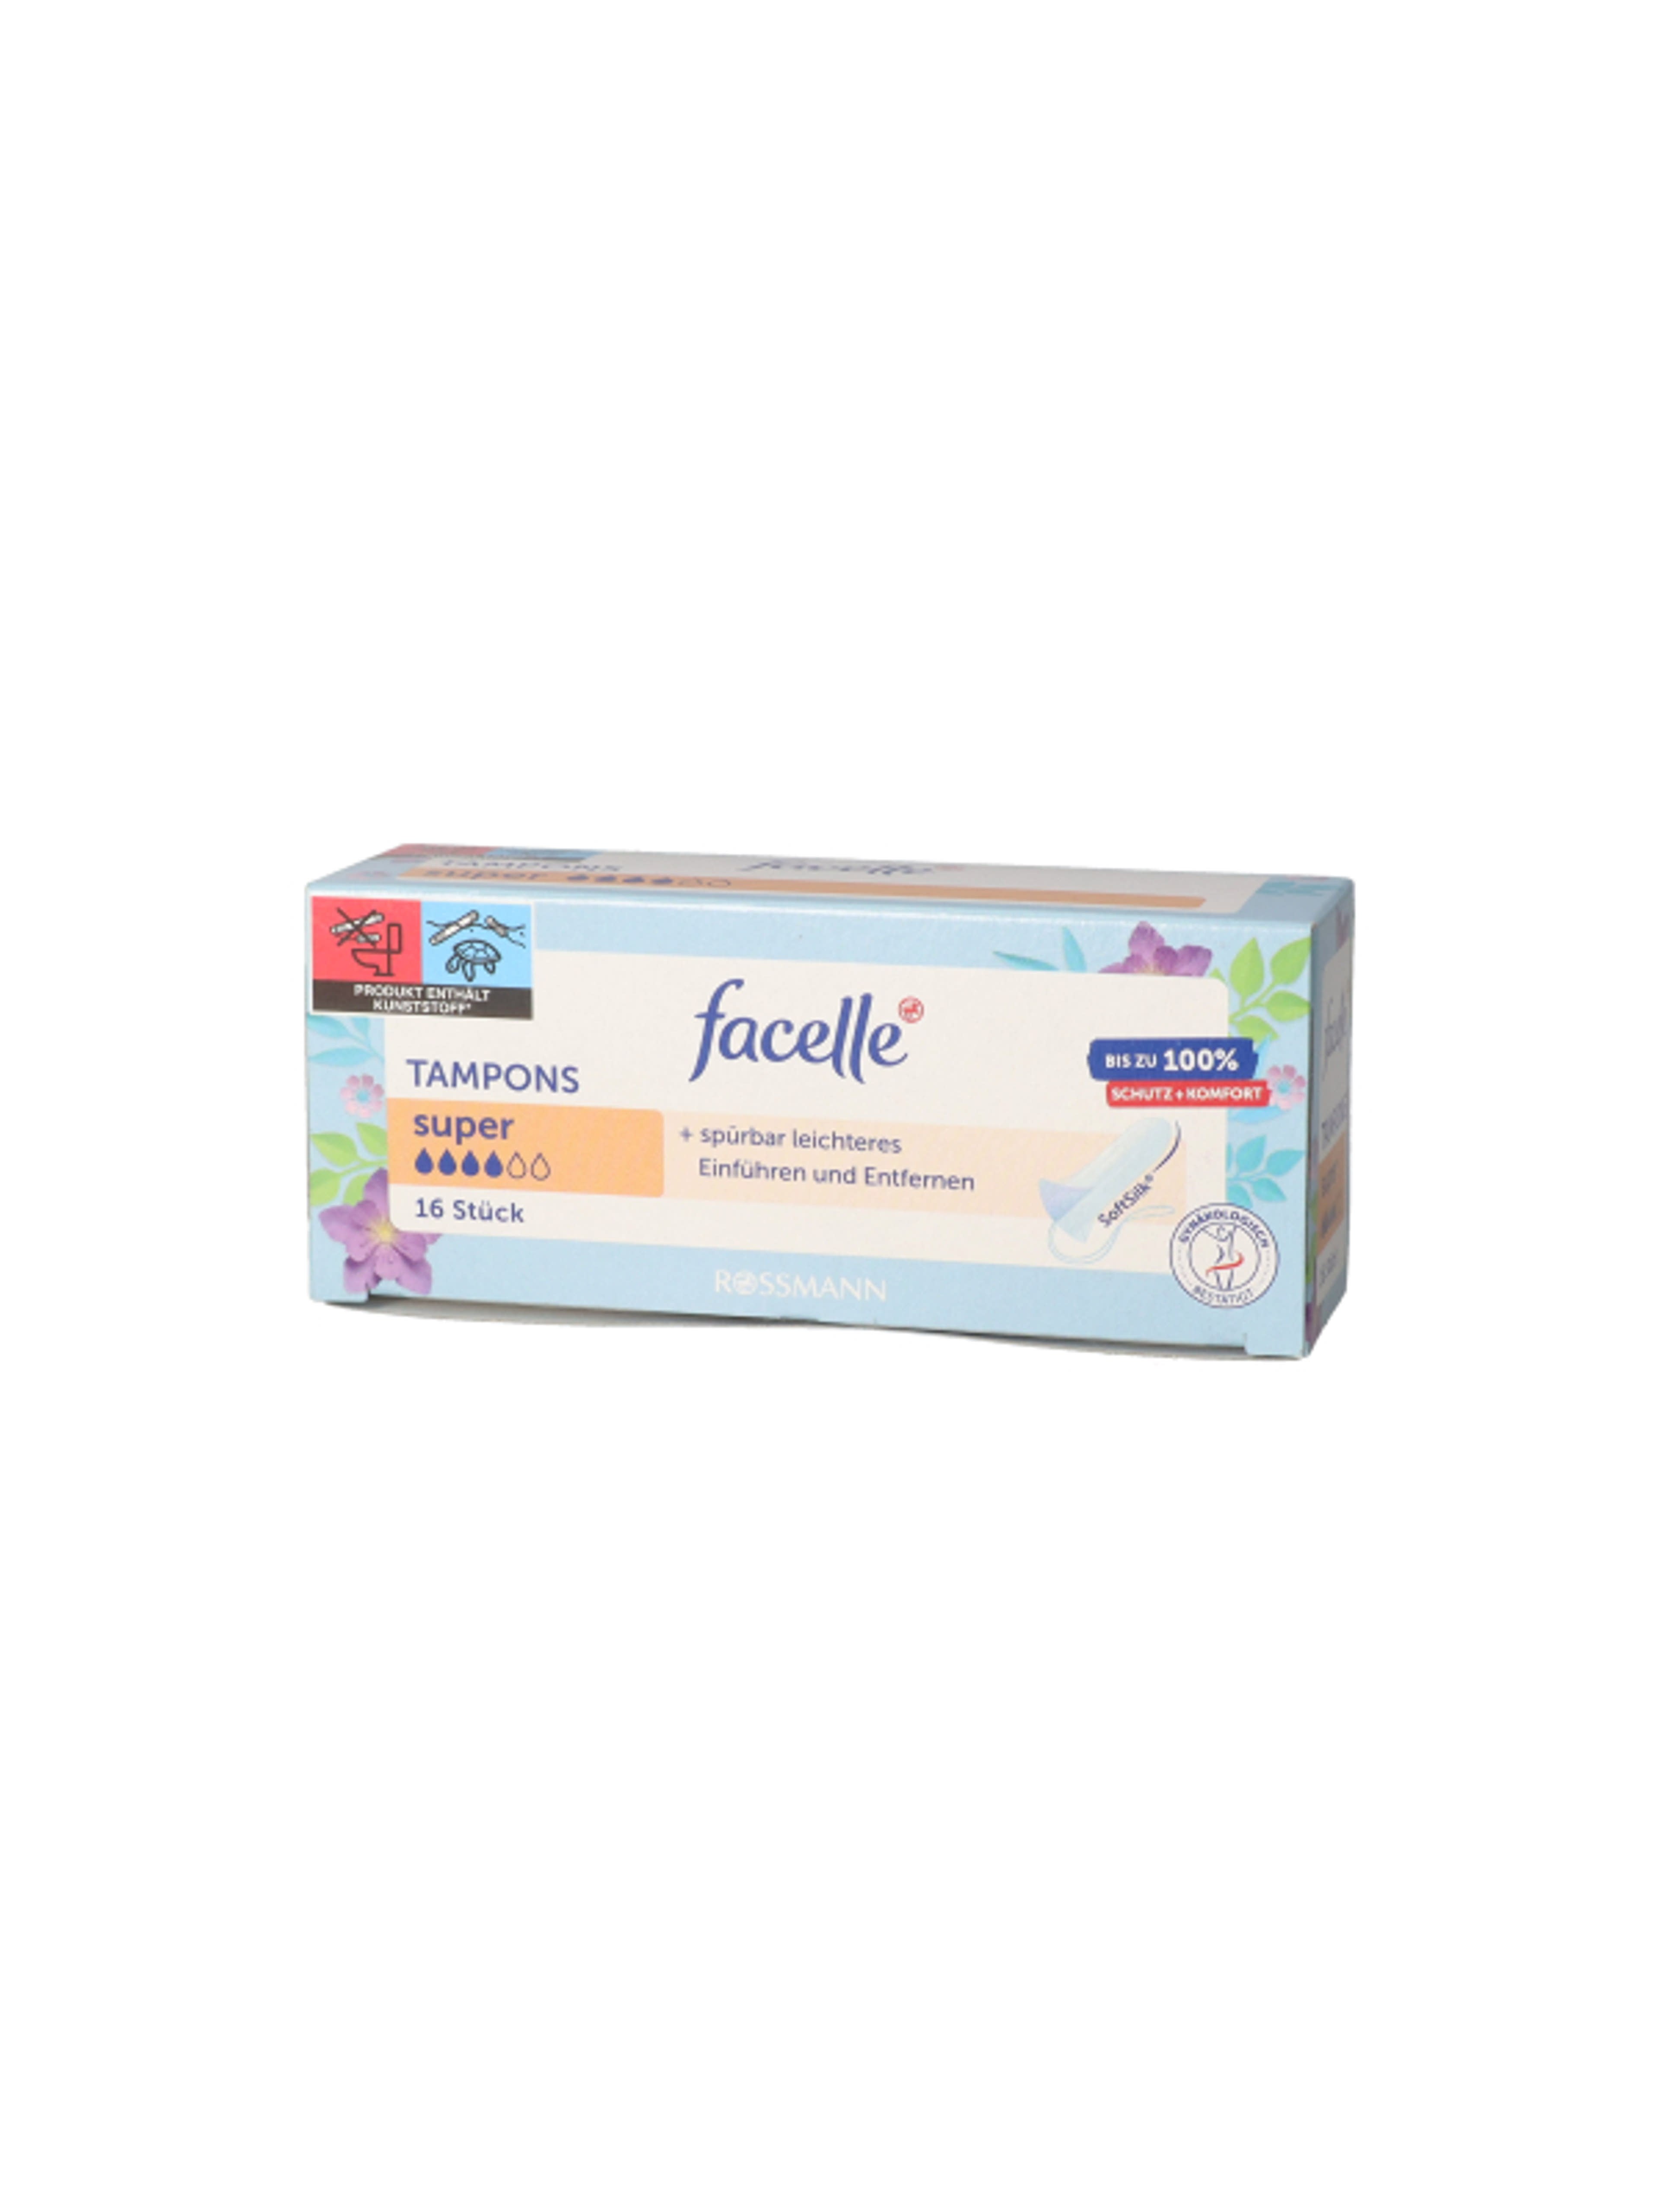 Facelle Super tampon - 16 db-6